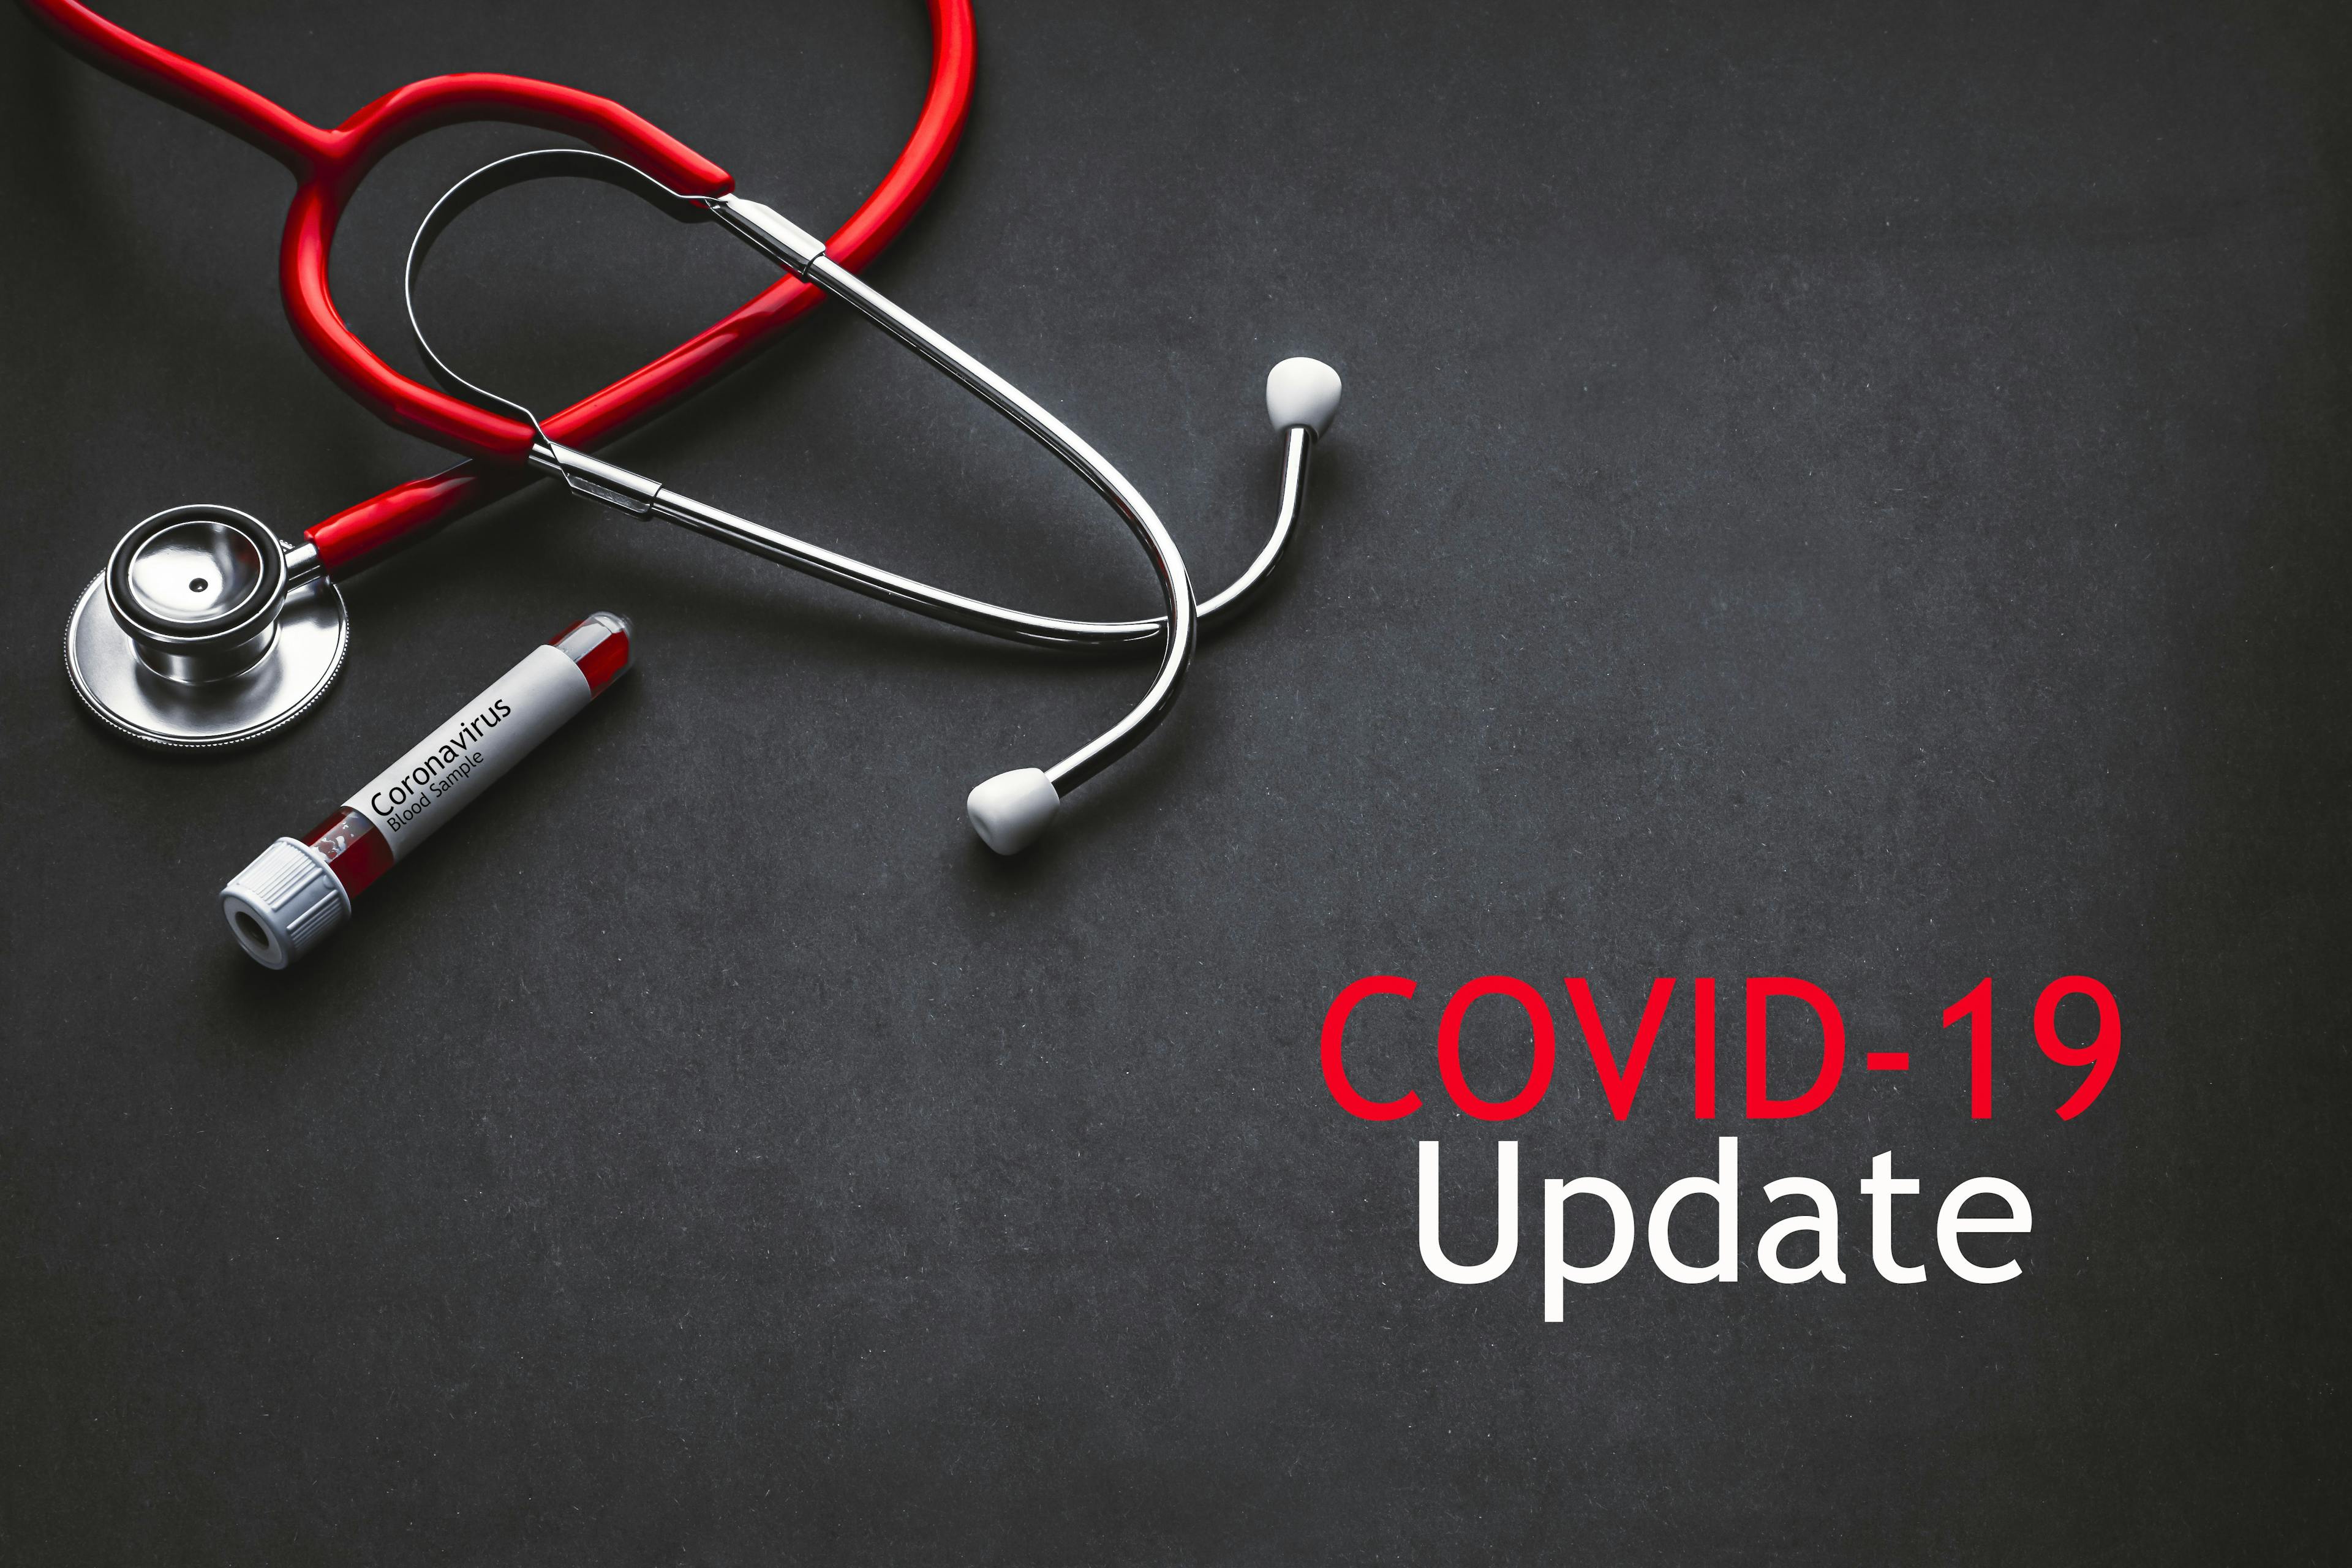 COVID-19 Update: Global Cases and Recoveries as of June 16, 2020